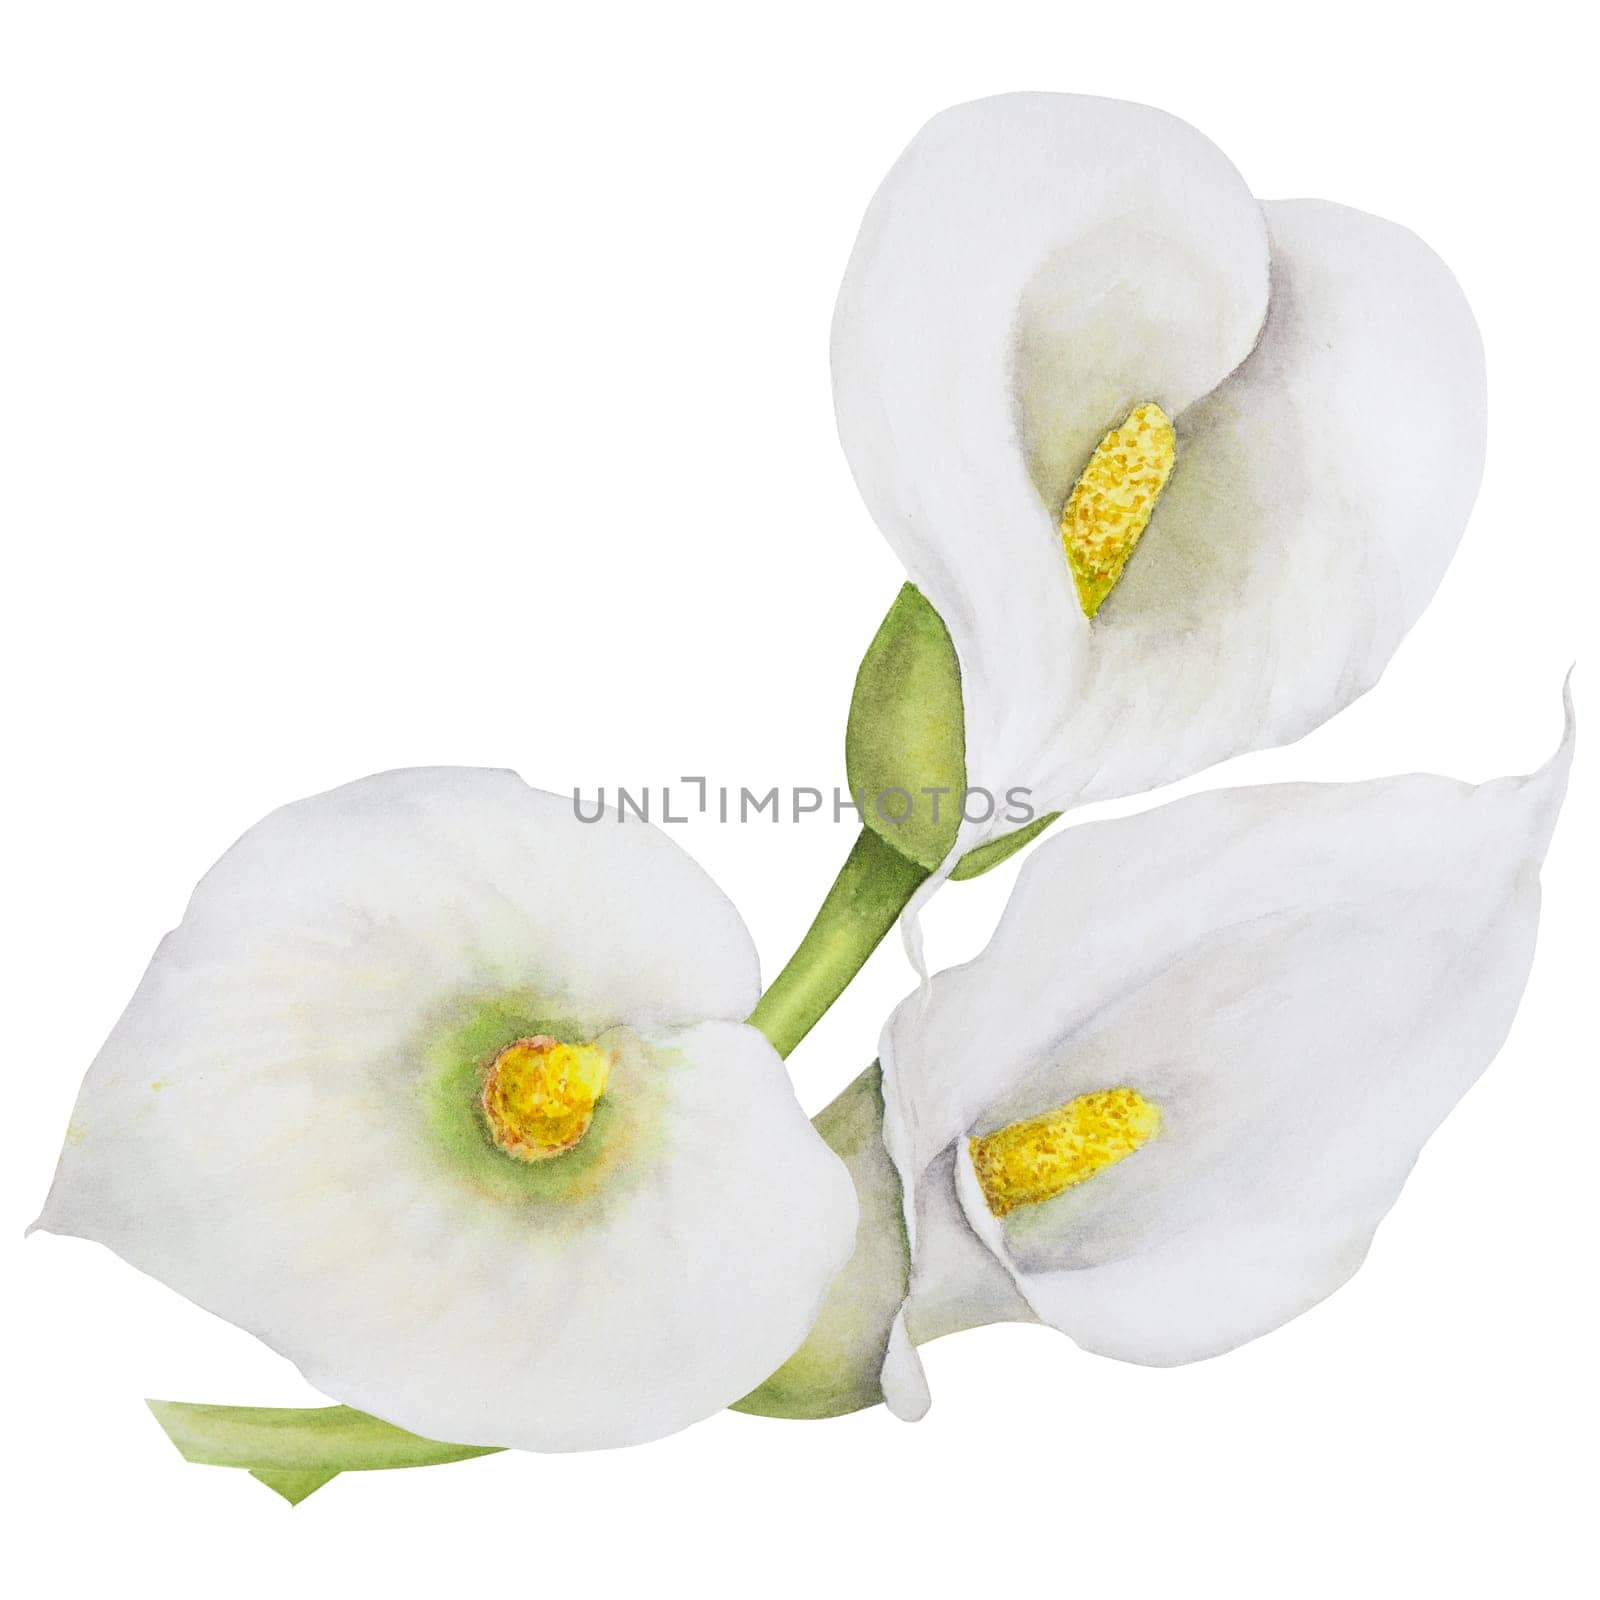 Watercolor clipart of white calla lily flowers and eucalipt. Hand drawn floral illustration for wedding invitations, floristic salons, cosmetics, beauty. Isolated composition tropical water arum for greetings, prints, posters